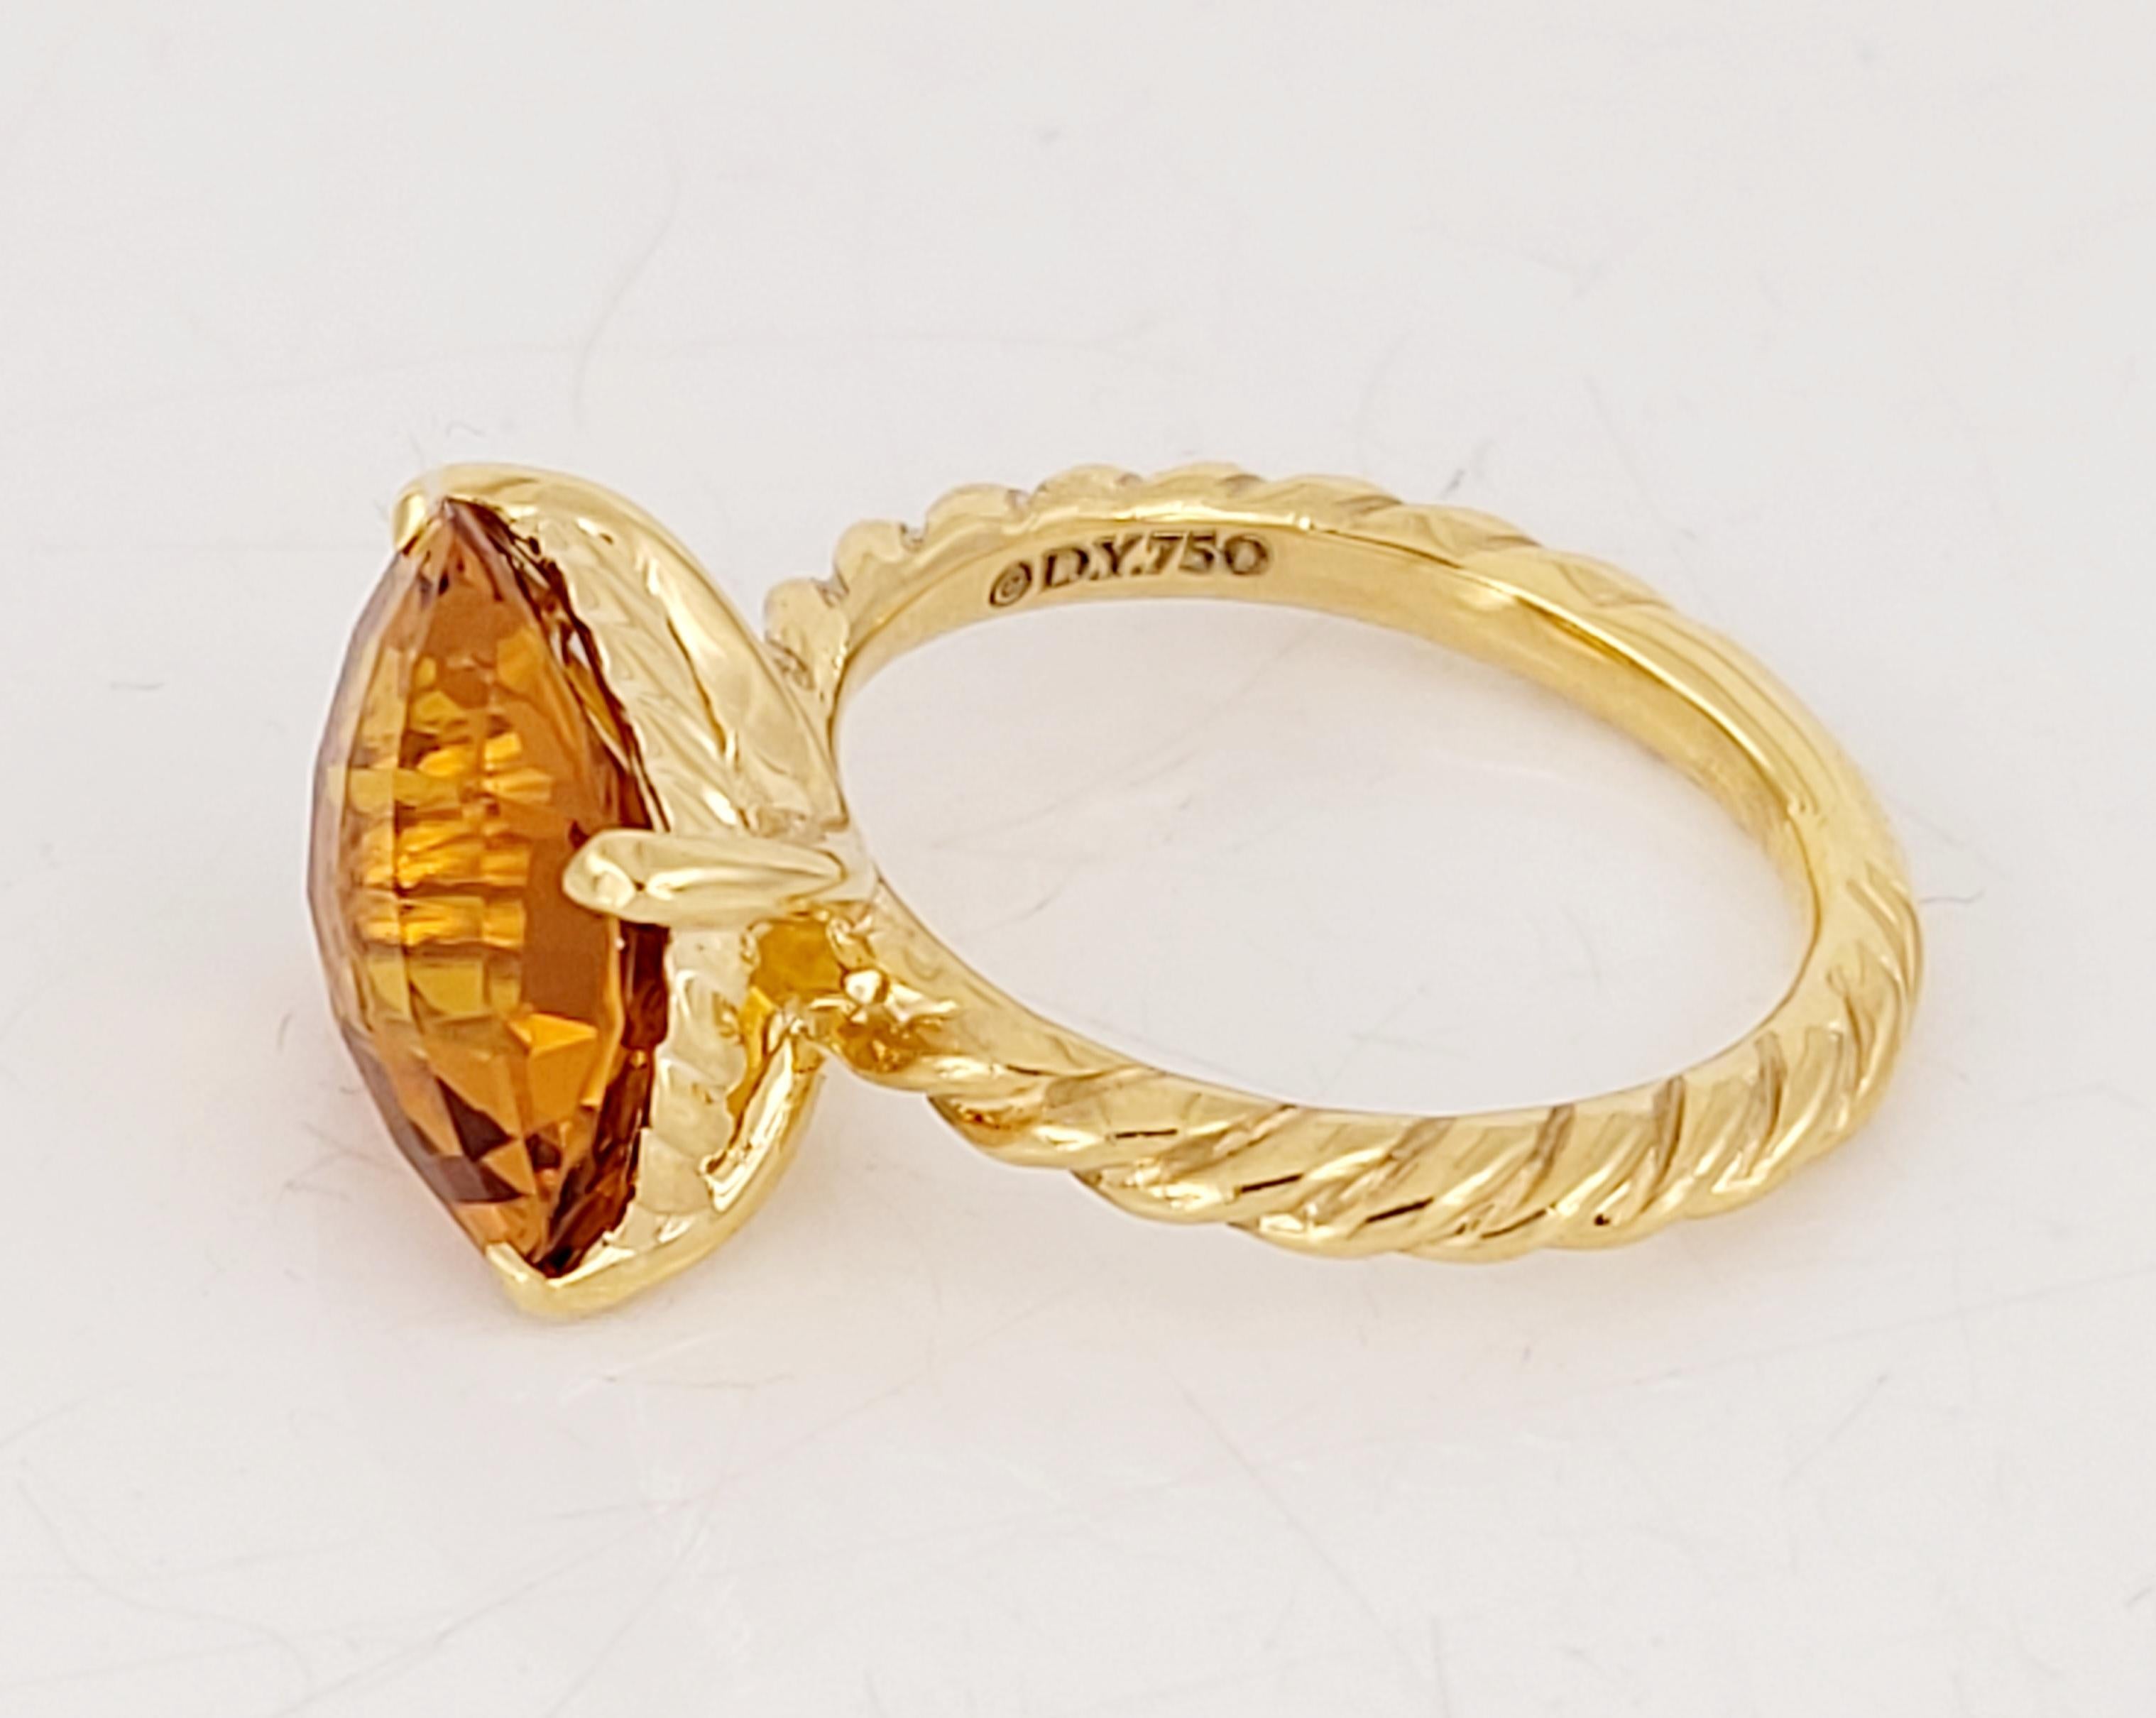 Brand David Yurman
Noblesse Collection Ring
Material 18K Yellow Gold
Gemstone 3.25ct
Ring Size 5.25
Ring Weight 4.7gr
Condition New, never worn 
Retail Price:$2.650